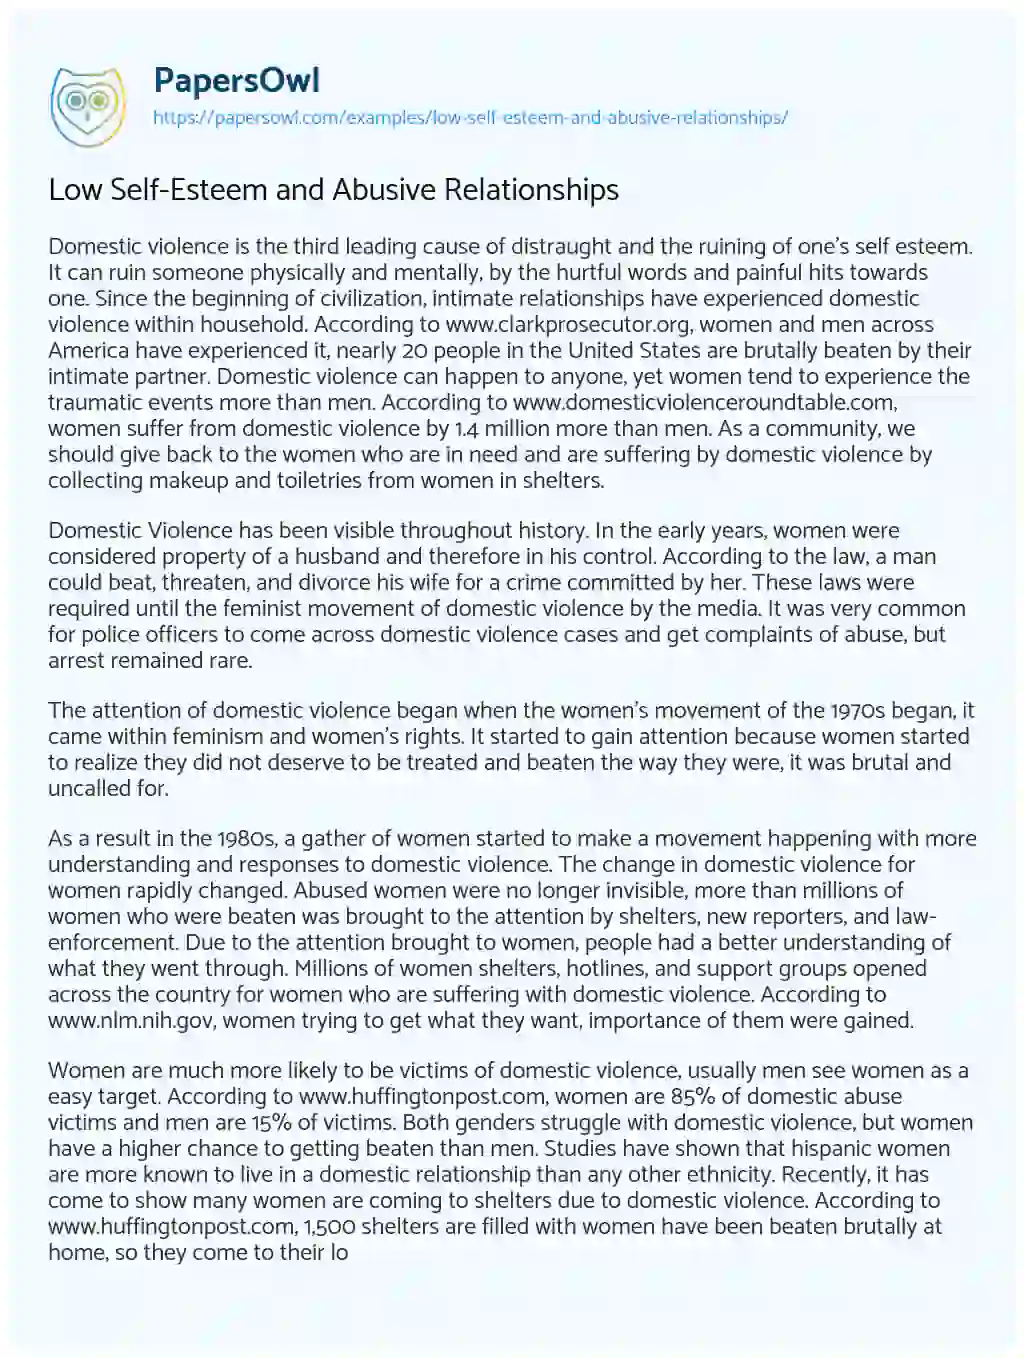 Essay on Low Self-Esteem and Abusive Relationships